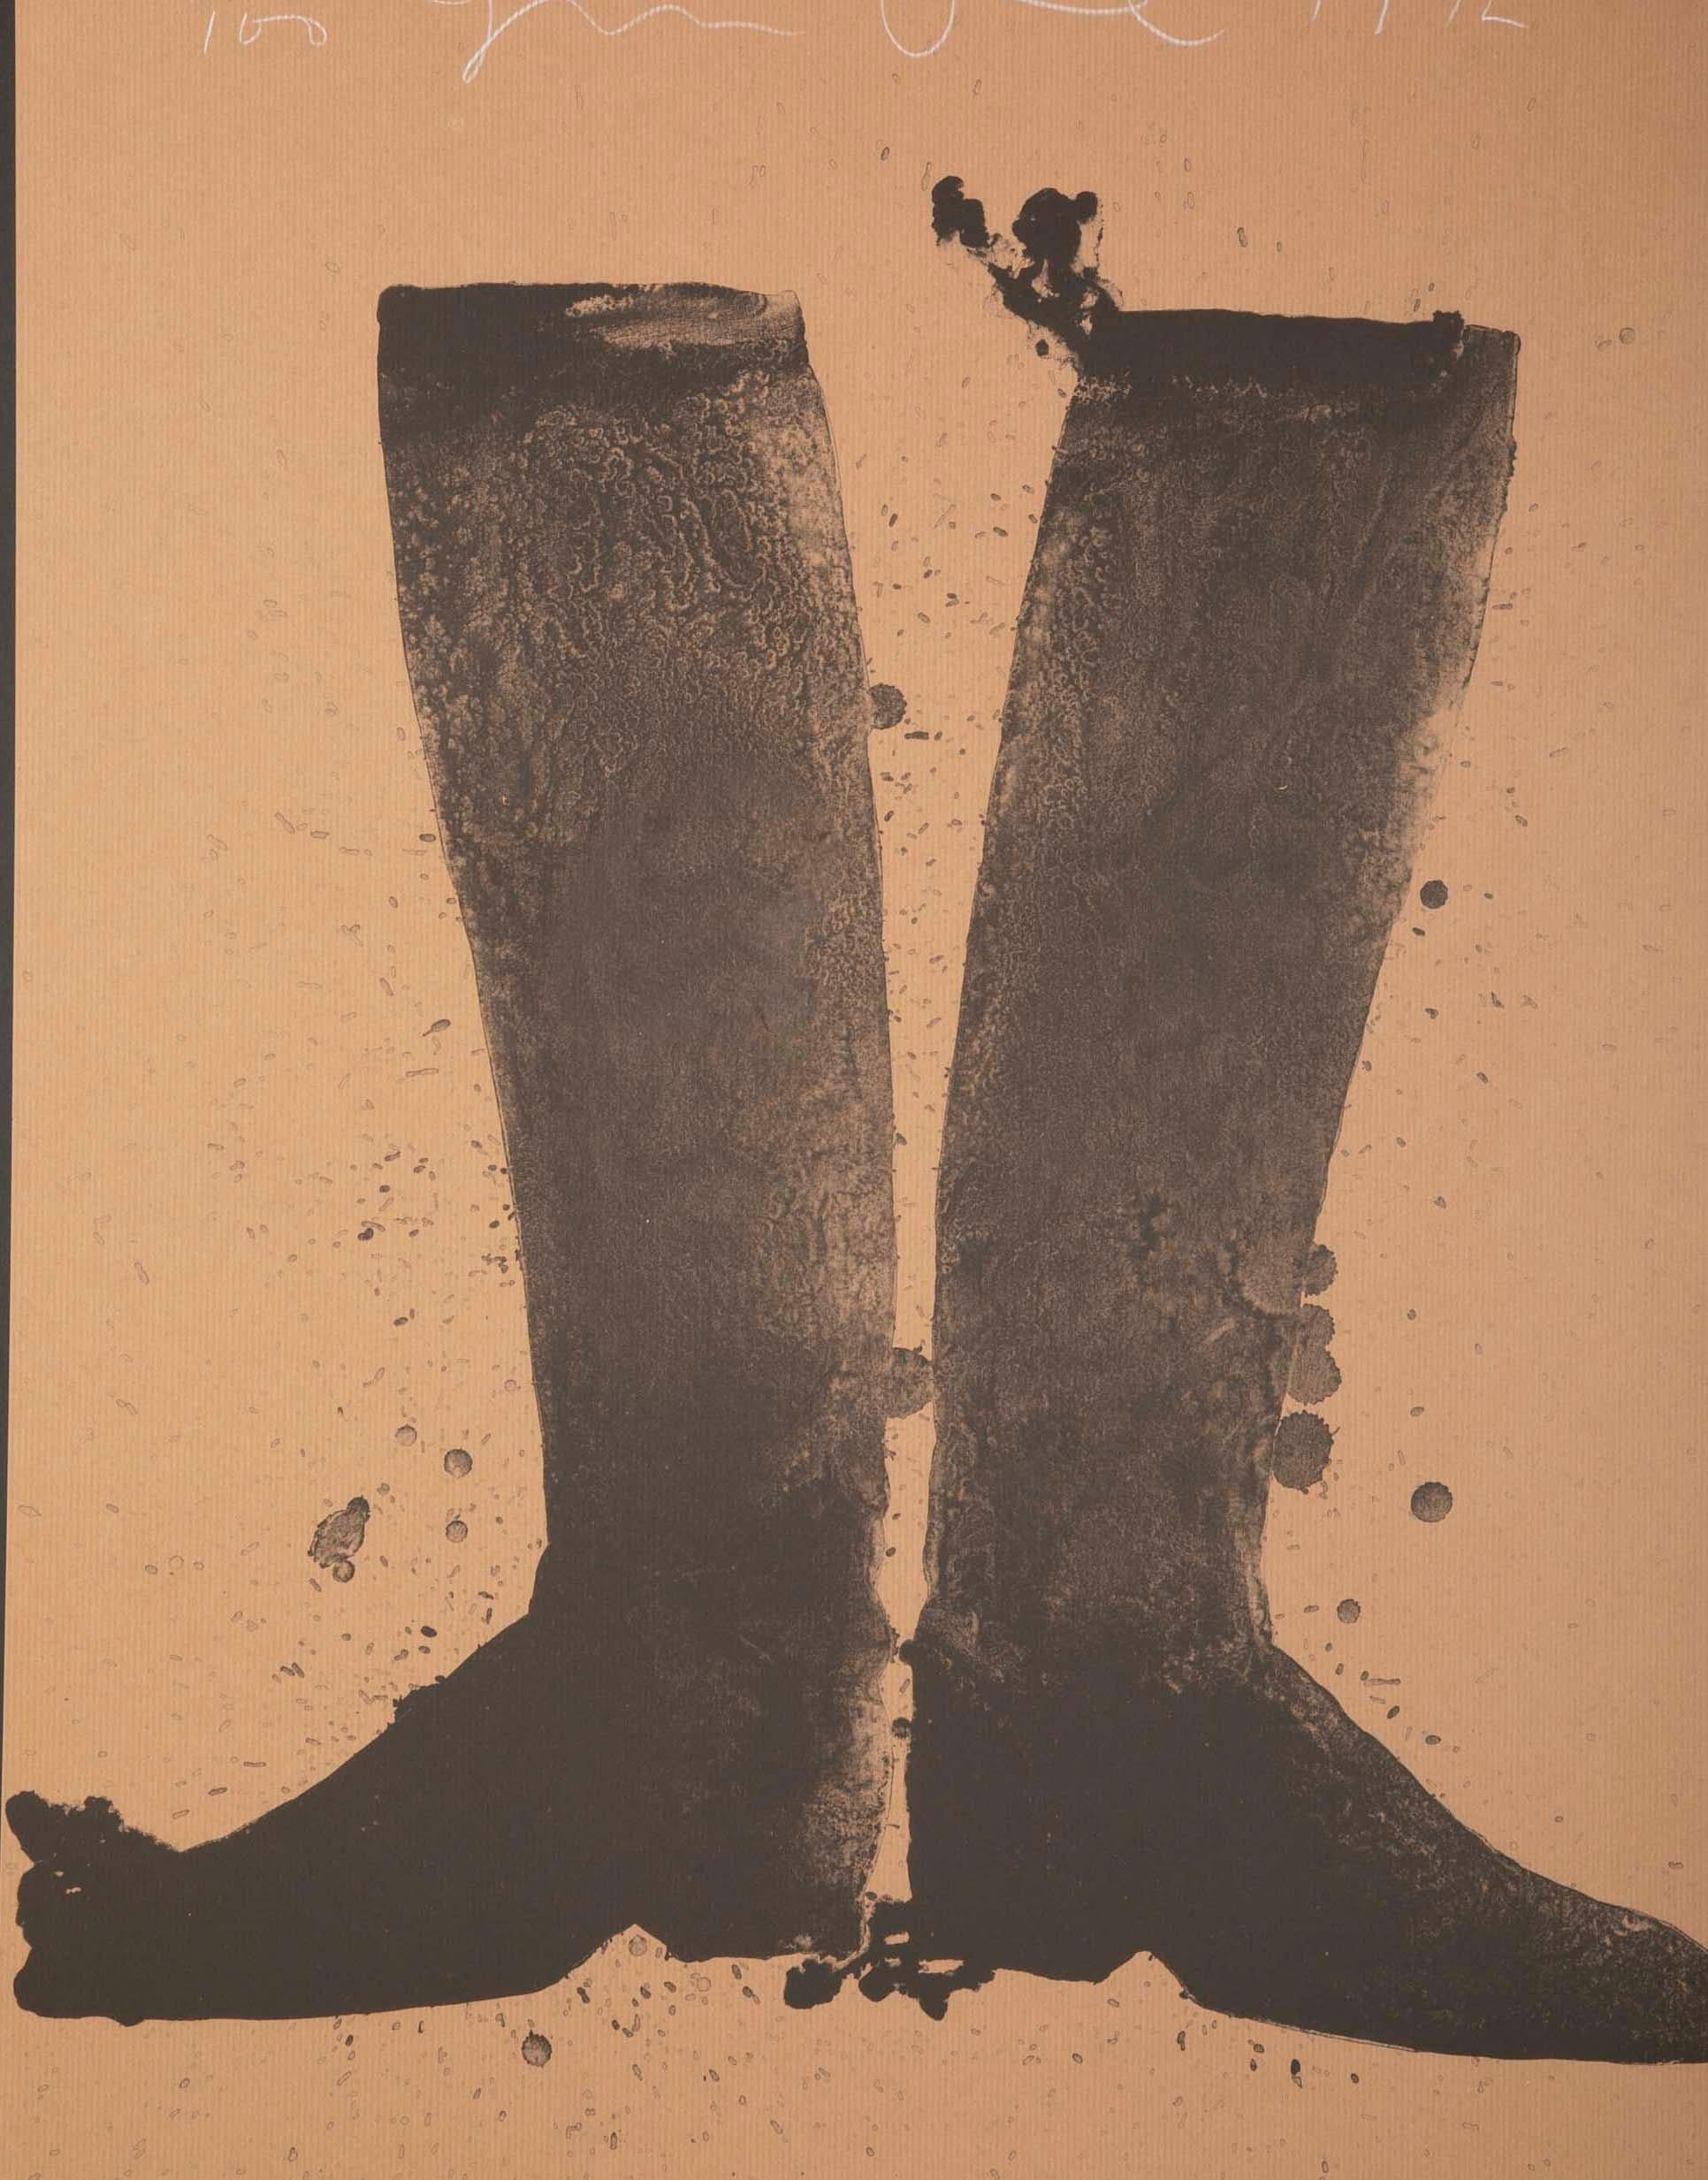 Jim Dine lithograph of a pair of boots; numbered 23/100. Signed and dated 1972. Framed using archival materials.